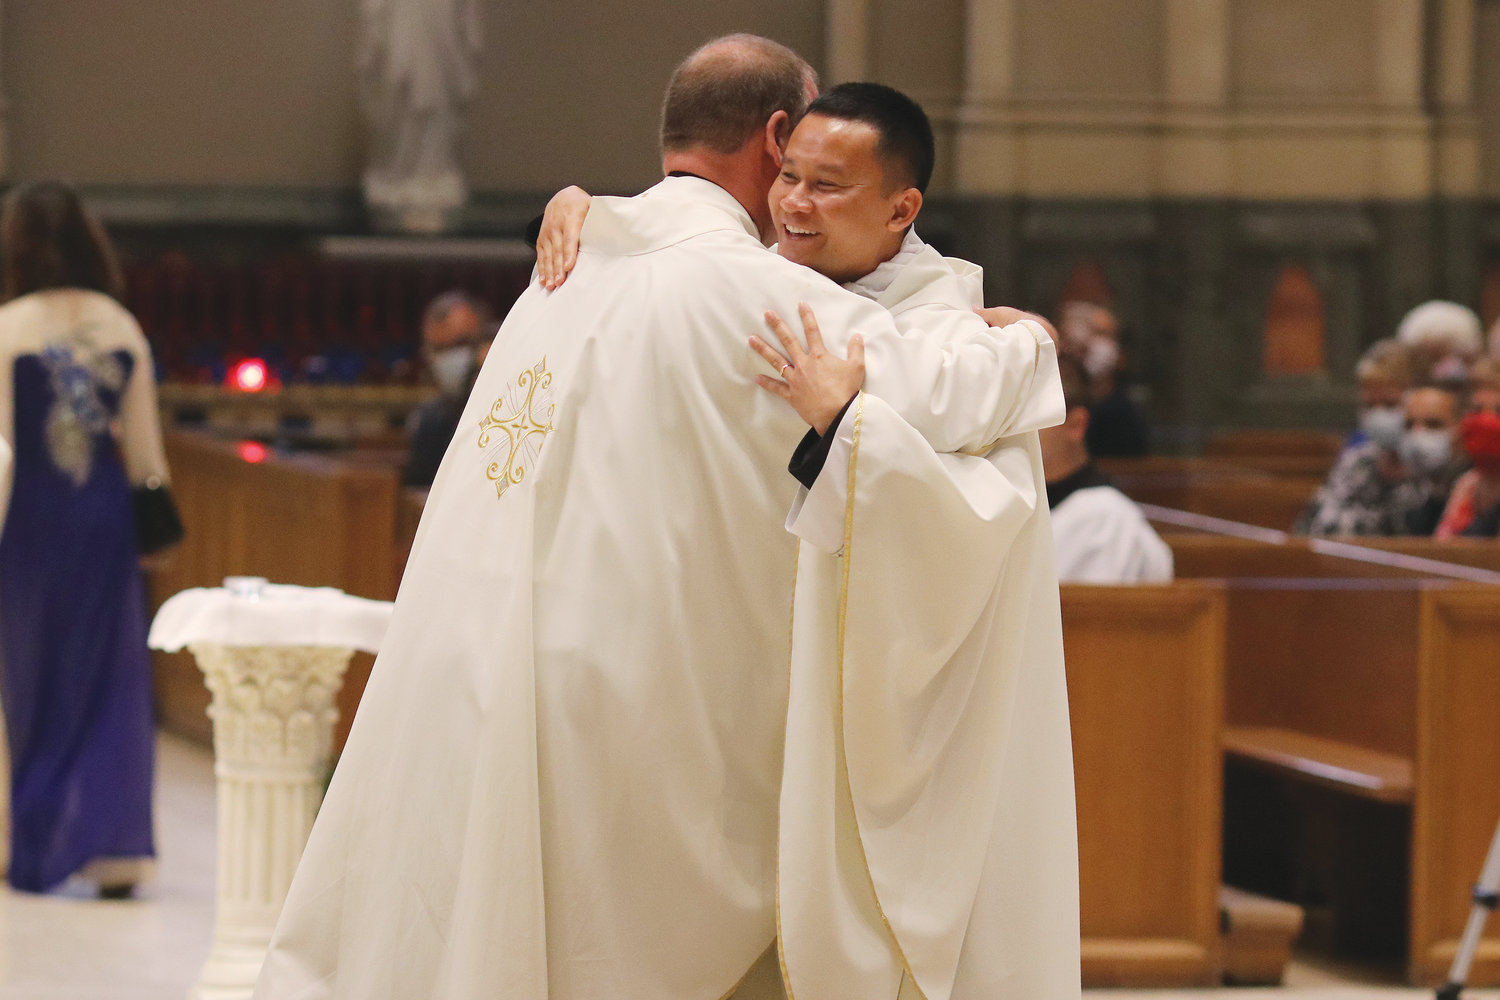 Msgr. Albert A. Kenney embraces his newest brother priest.